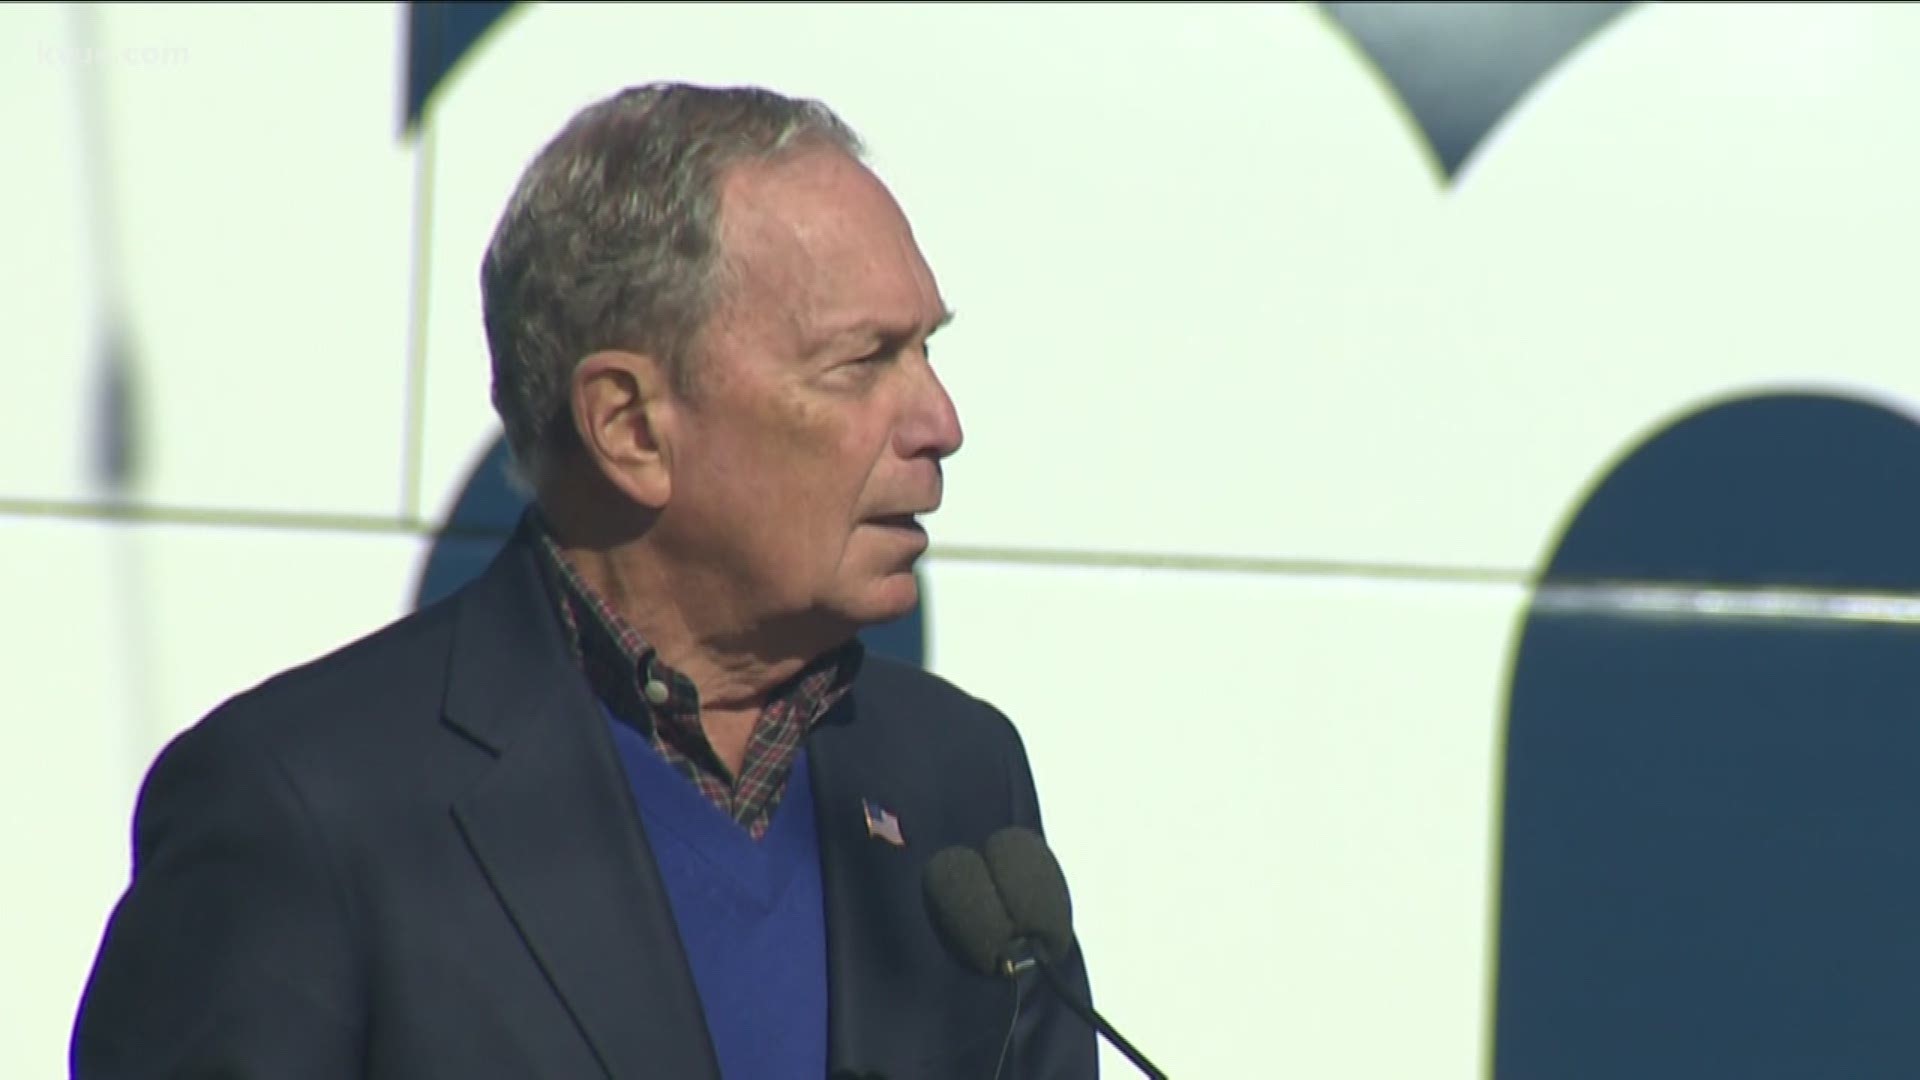 Democratic candidate Michael Bloomberg was in Austin on Saturday.